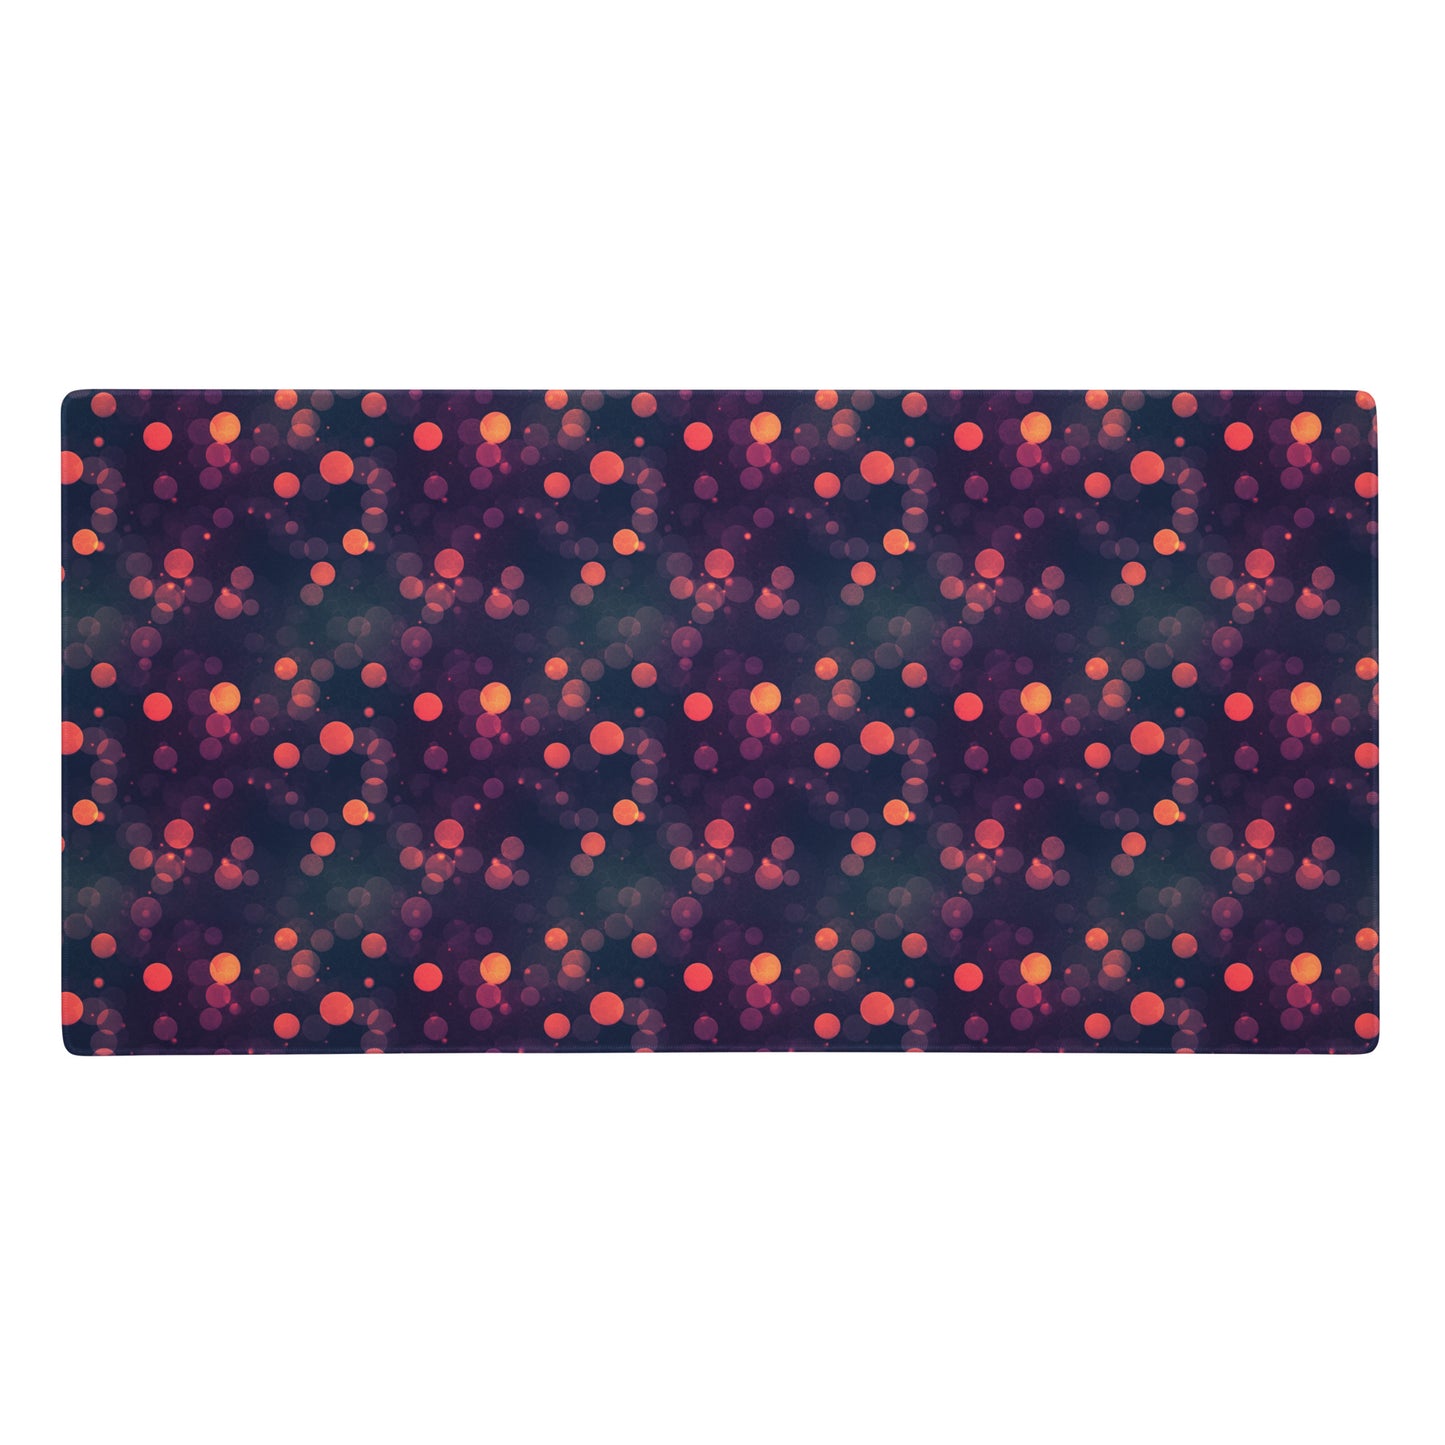 A 36" x 18" desk pad with a purple and red polka dot pattern.